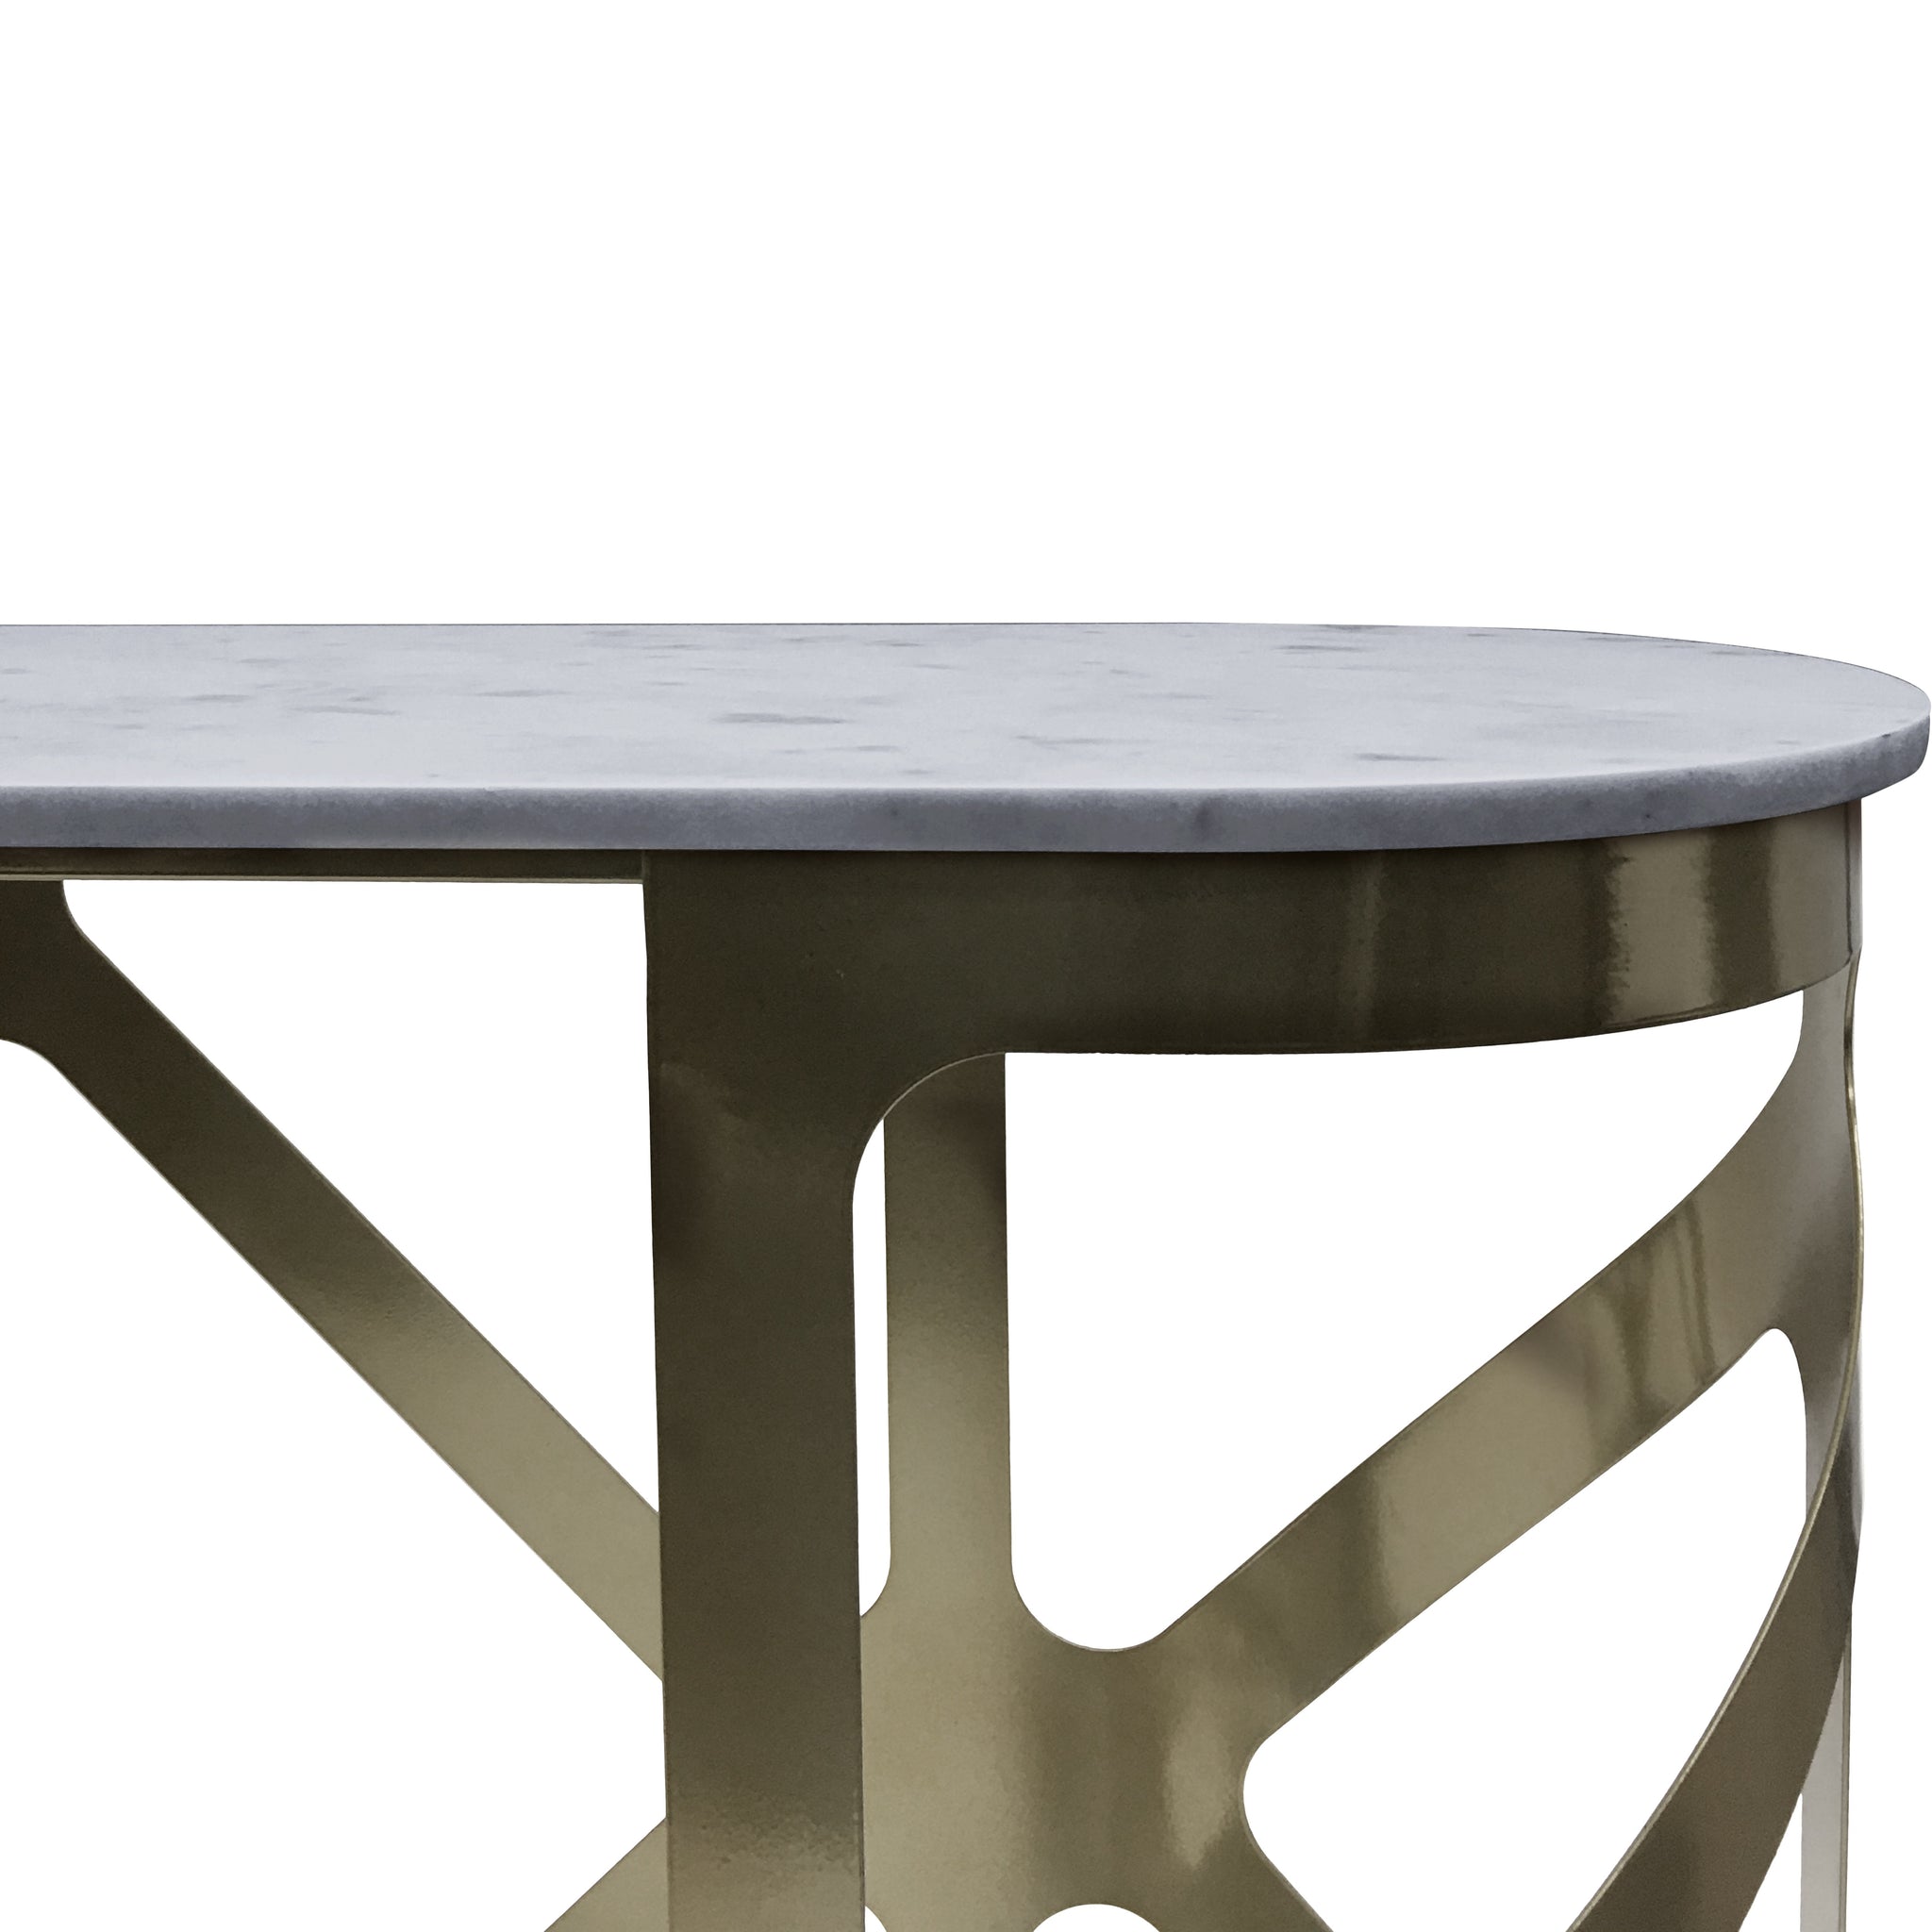 Metropole Console Table Metallic Black Nickel Finish with Grey Marble Top